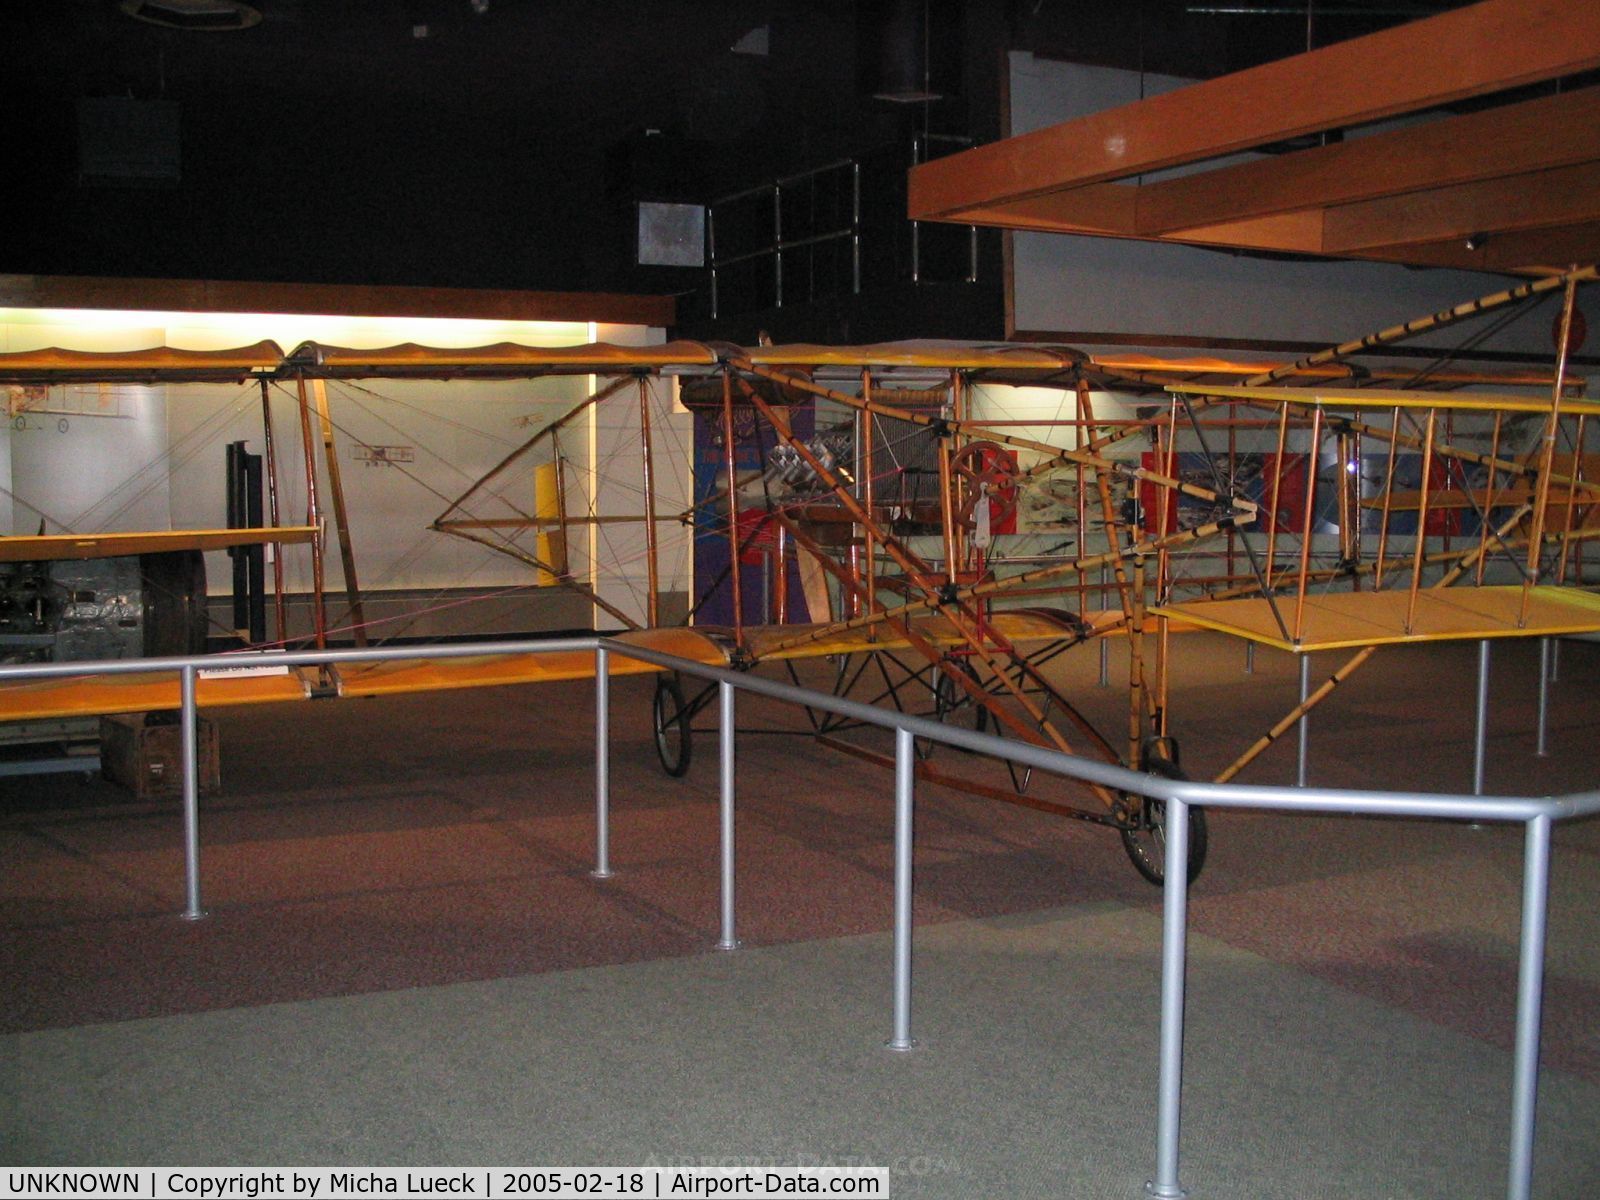 UNKNOWN, Miscellaneous Various C/N unknown, Curtiss Pusher of 1910, preserved at the Niagara Aerospace Museum in Niagara Falls, New York